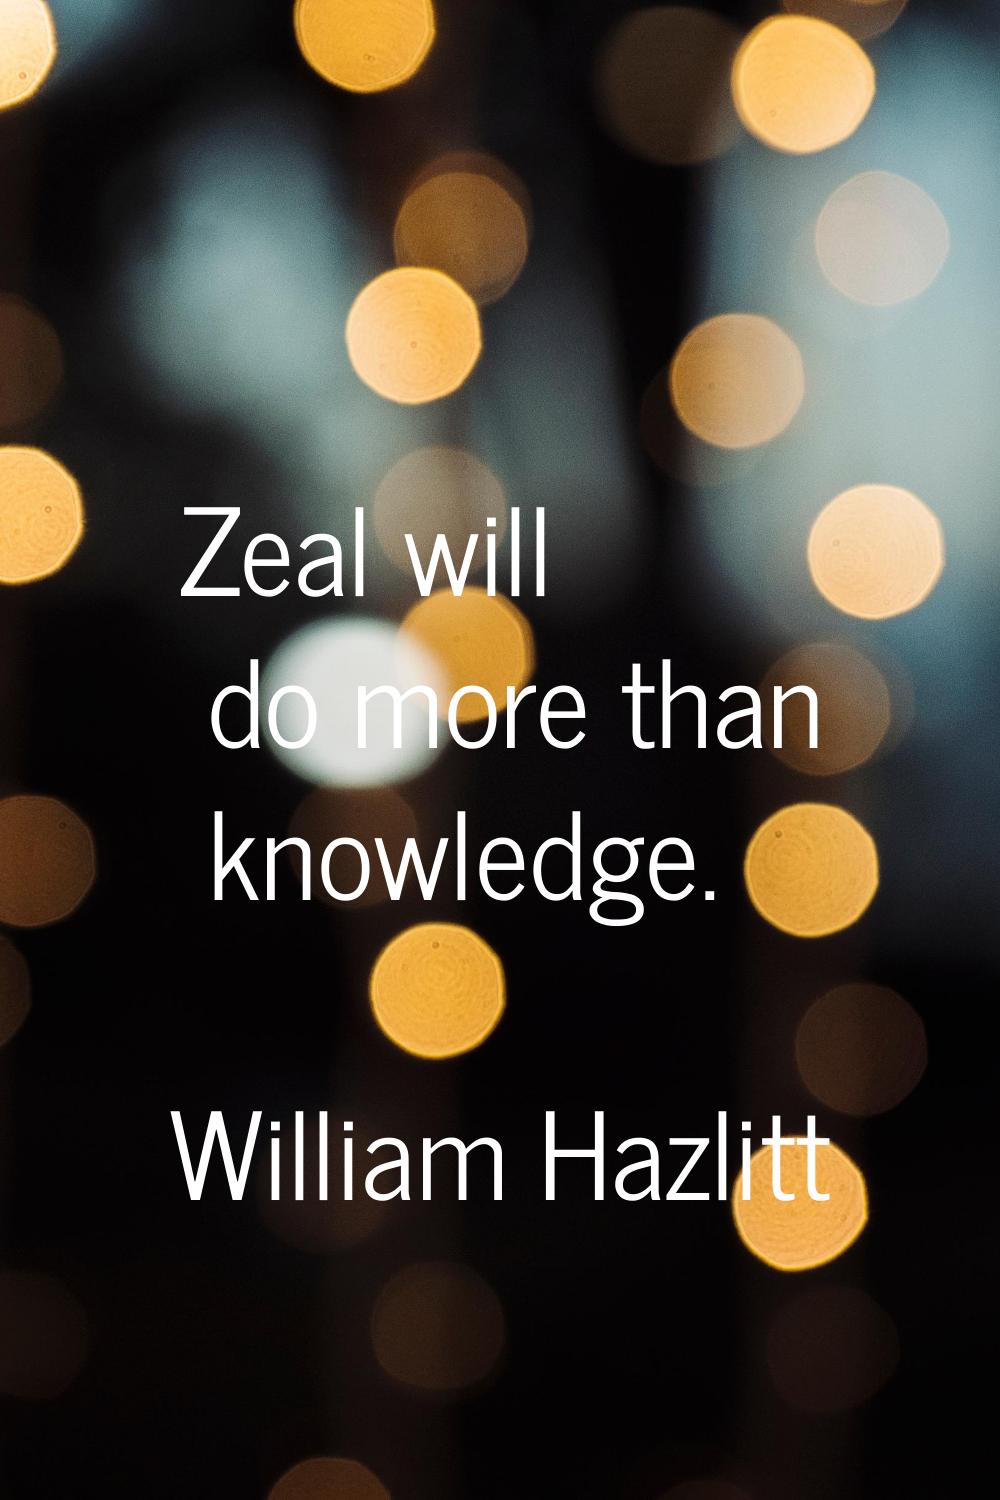 Zeal will do more than knowledge.